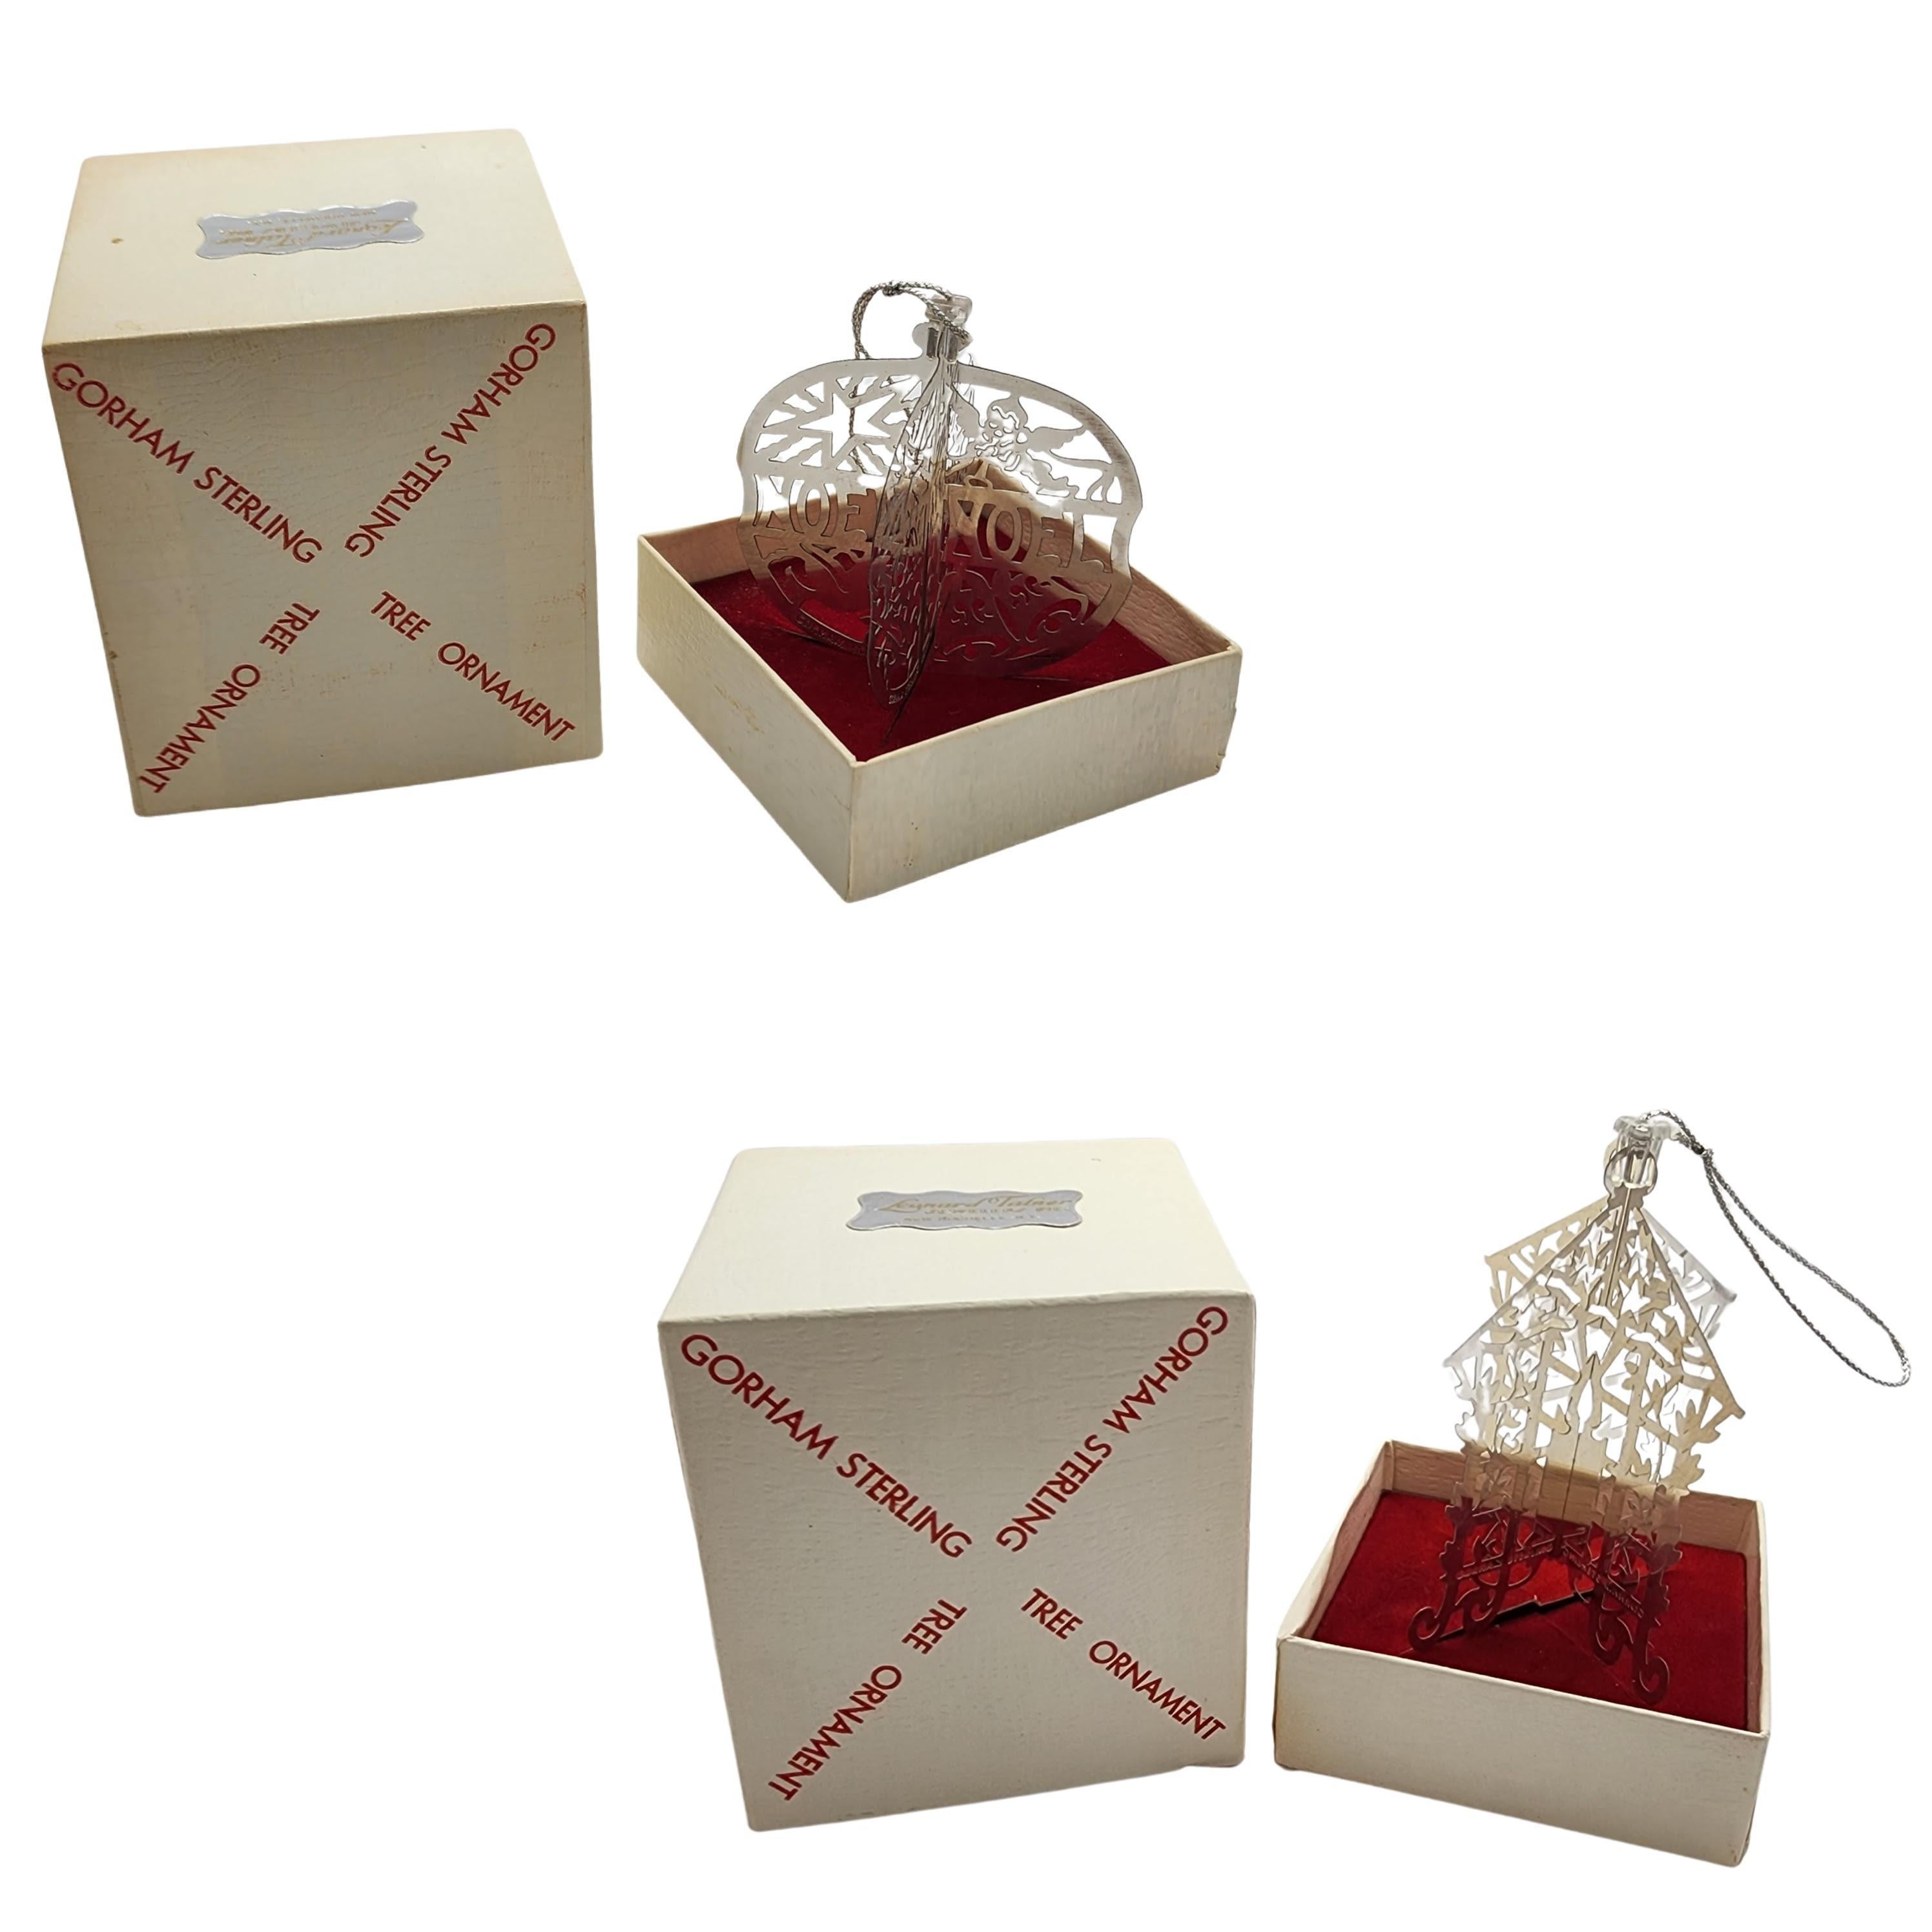 Set of 3 Gorham sterling silver pierced ornaments, with 2 boxes.

From the pierced collection of the 1970s, each ornament features 2 pierced design sterling silver pieces and a top piece with a loop that holds the 2 pieces together to make a 3D